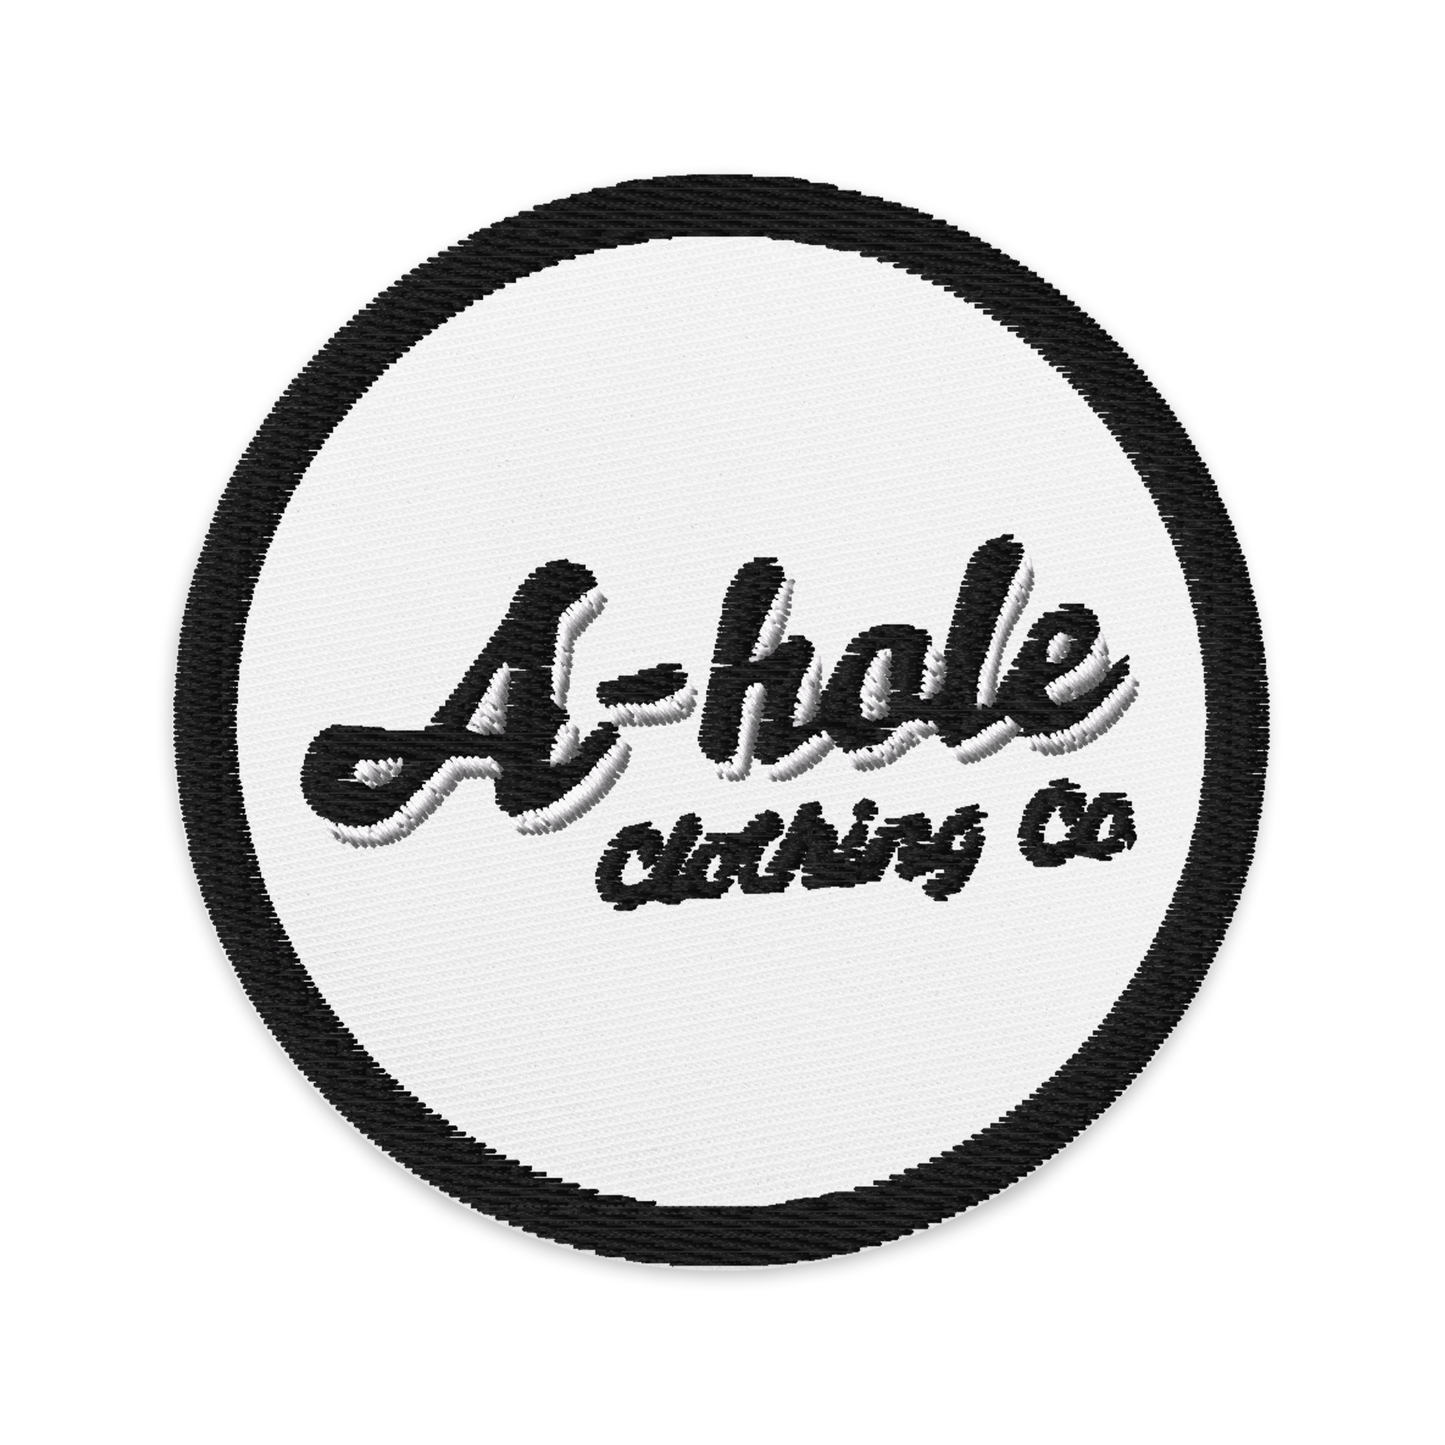 A-Hole Logo Embroidered Patches